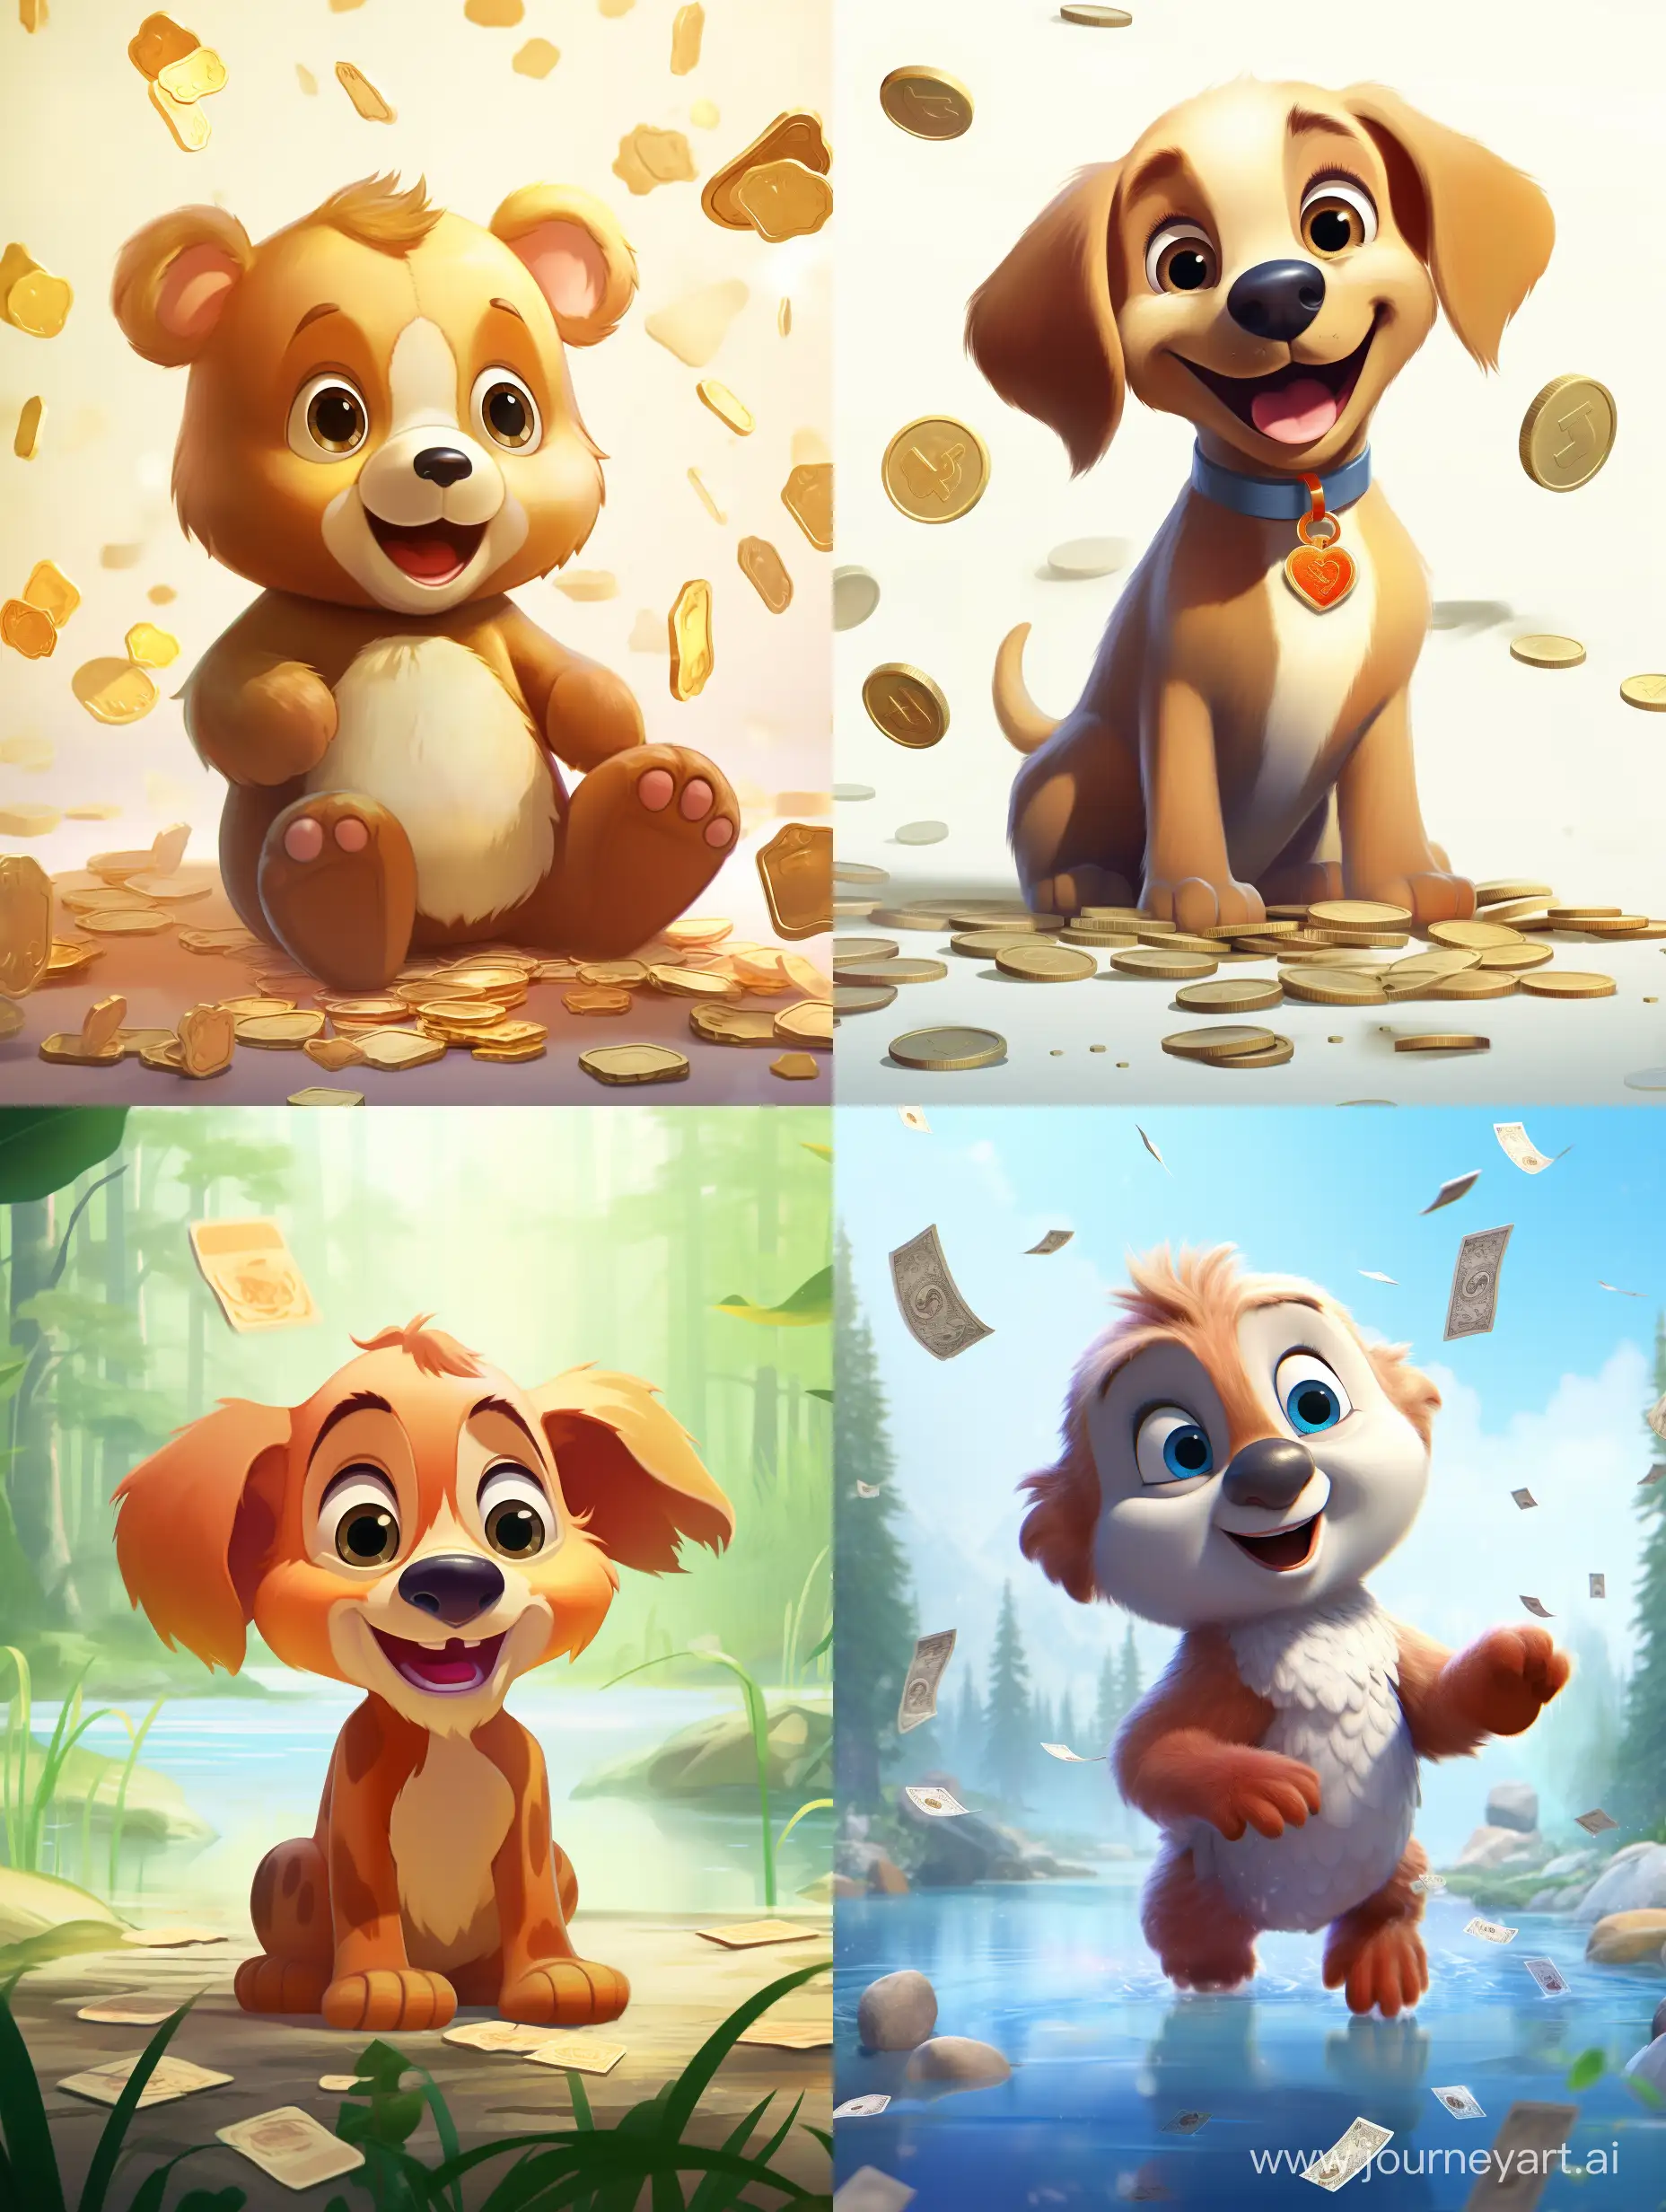 Adorable-DisneyStyle-Animal-Tossing-Russian-Banknotes-and-Coins-on-a-Light-Background